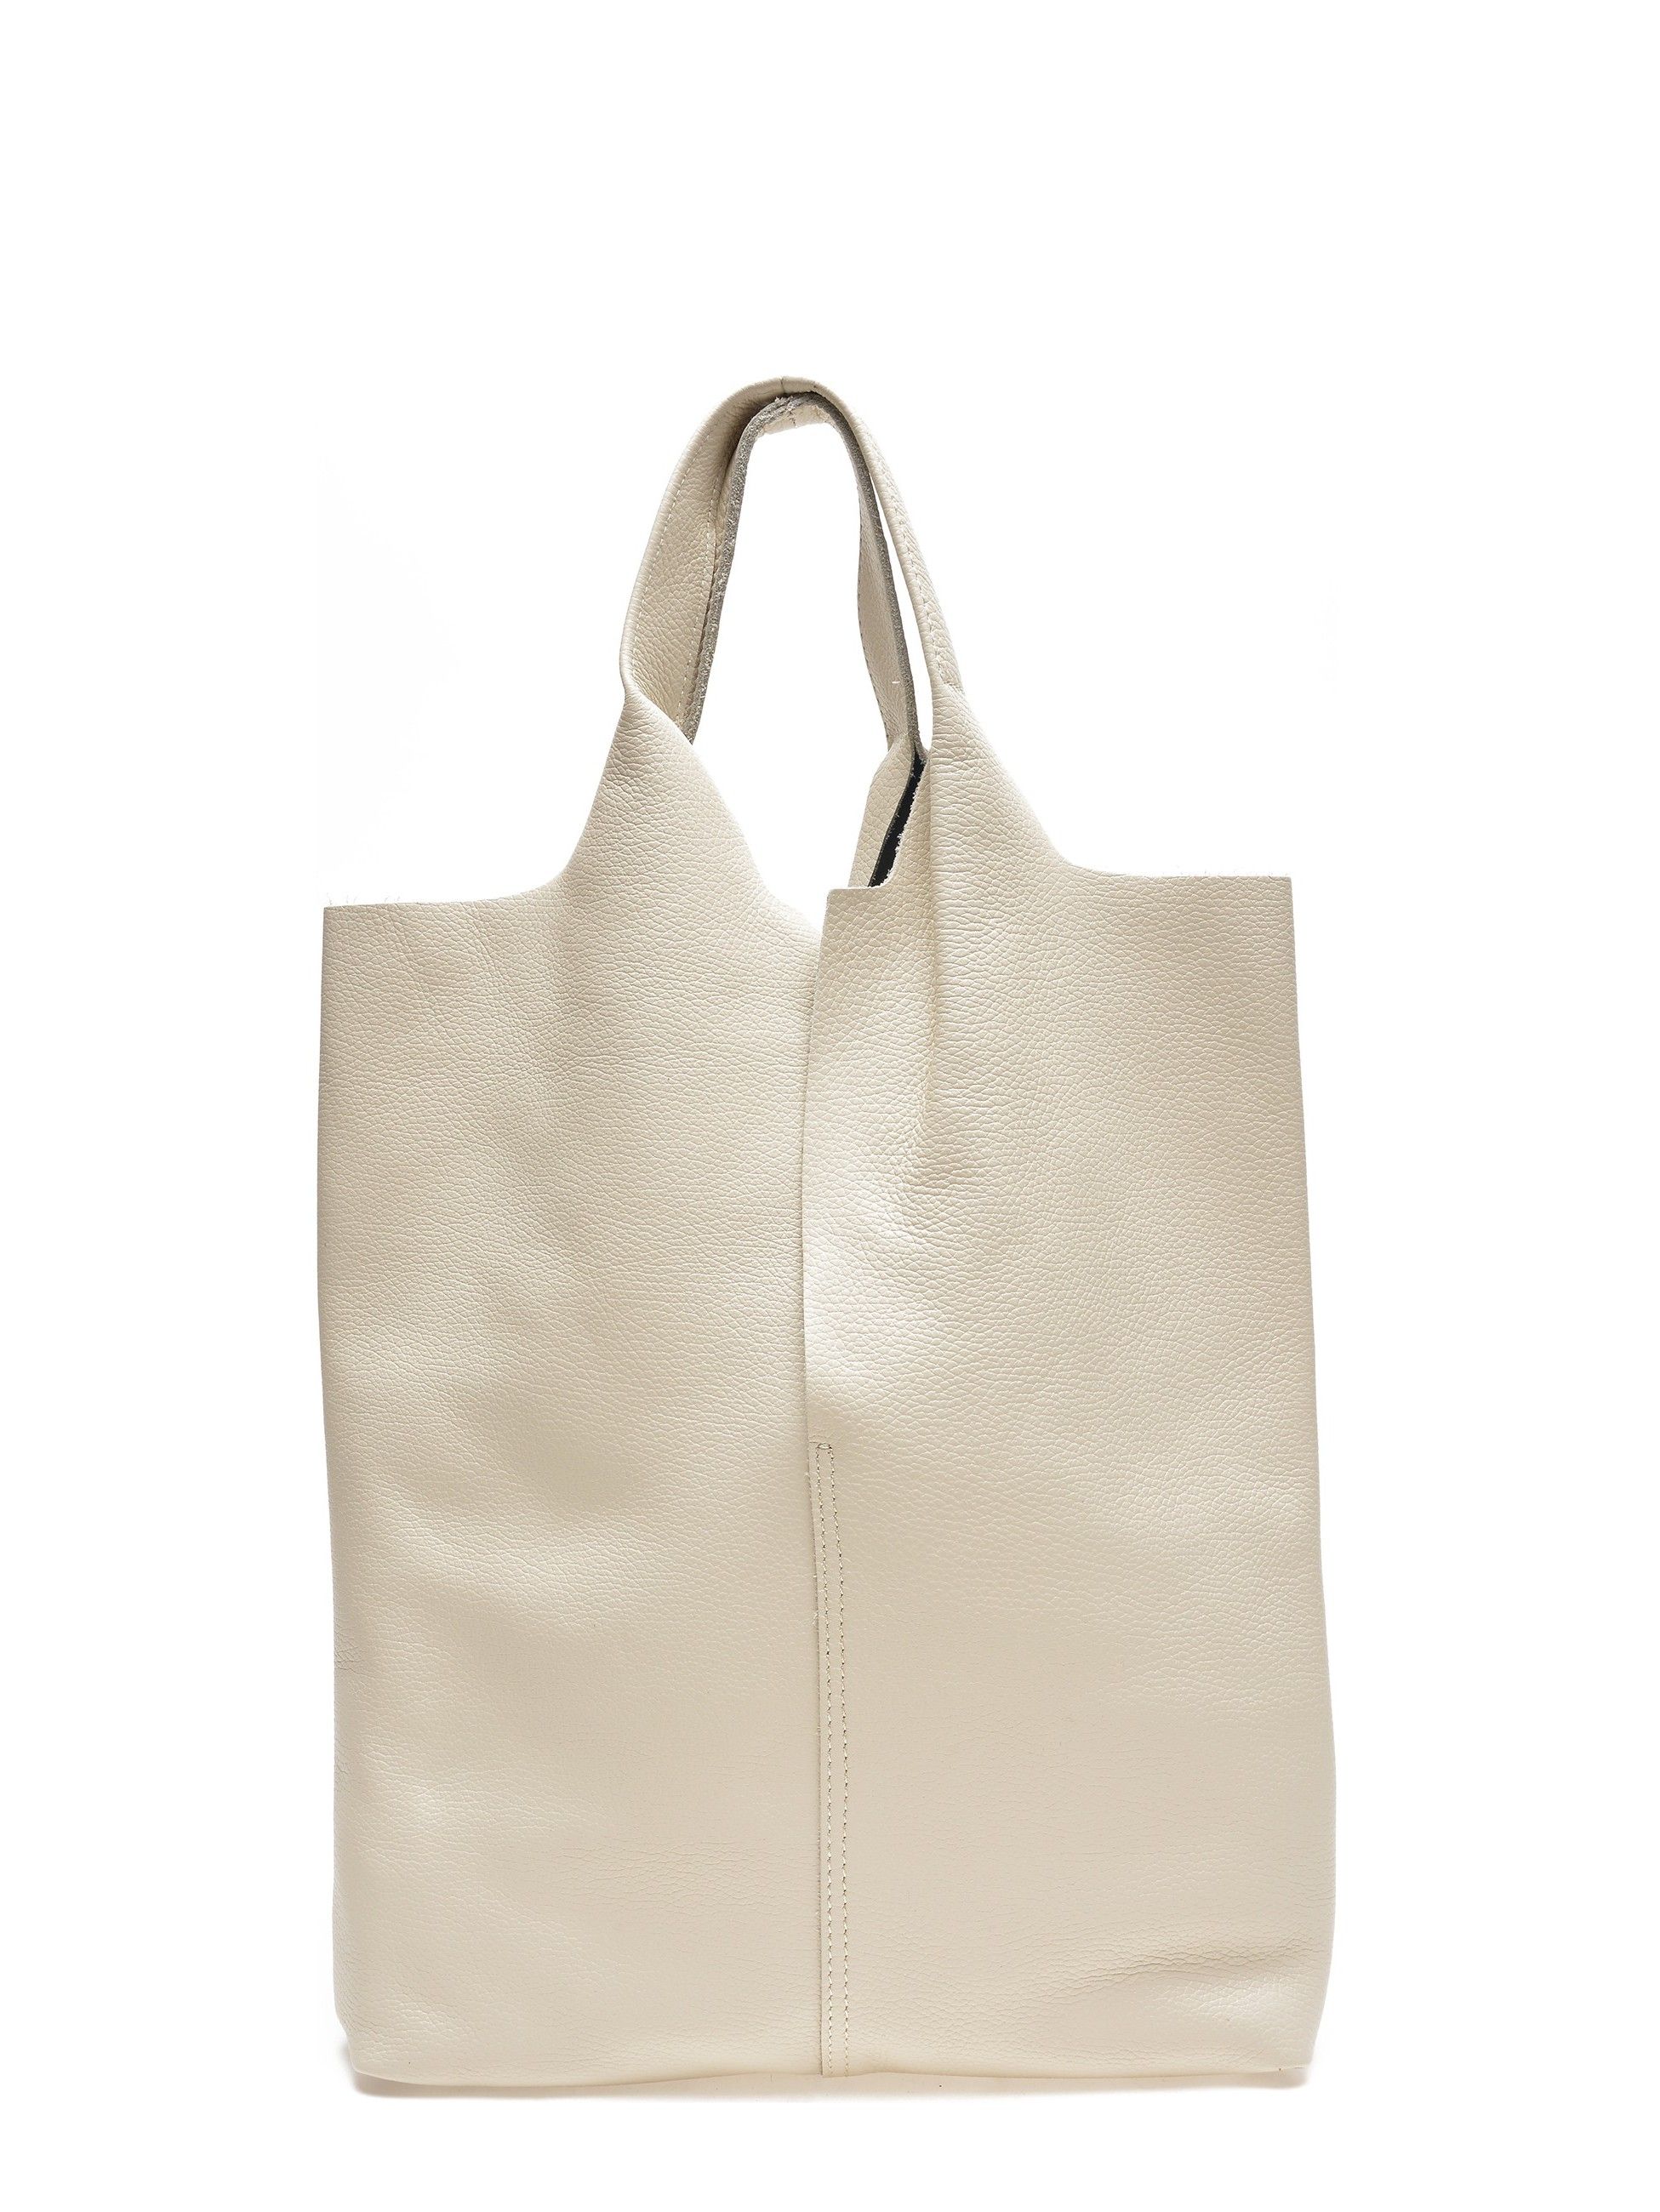 Shopper Bag
100% cow leather
Two top handles: 30 cm
Interior zip pocket
Dimensions: 42x38xcm